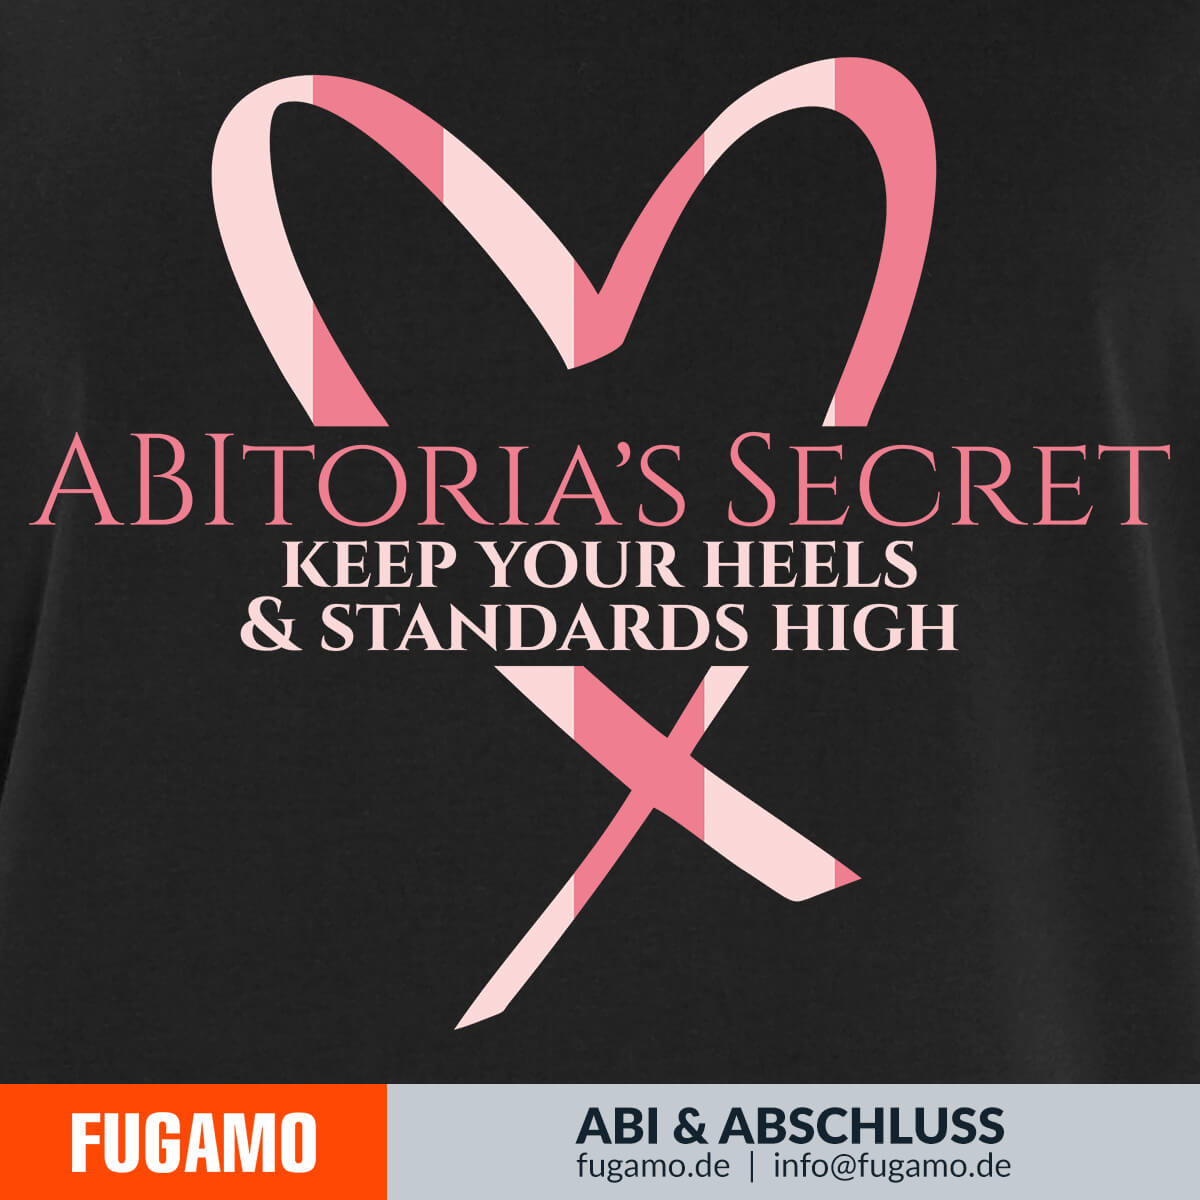 ABItoria's Secret - 05 - Keep your heels and standards high